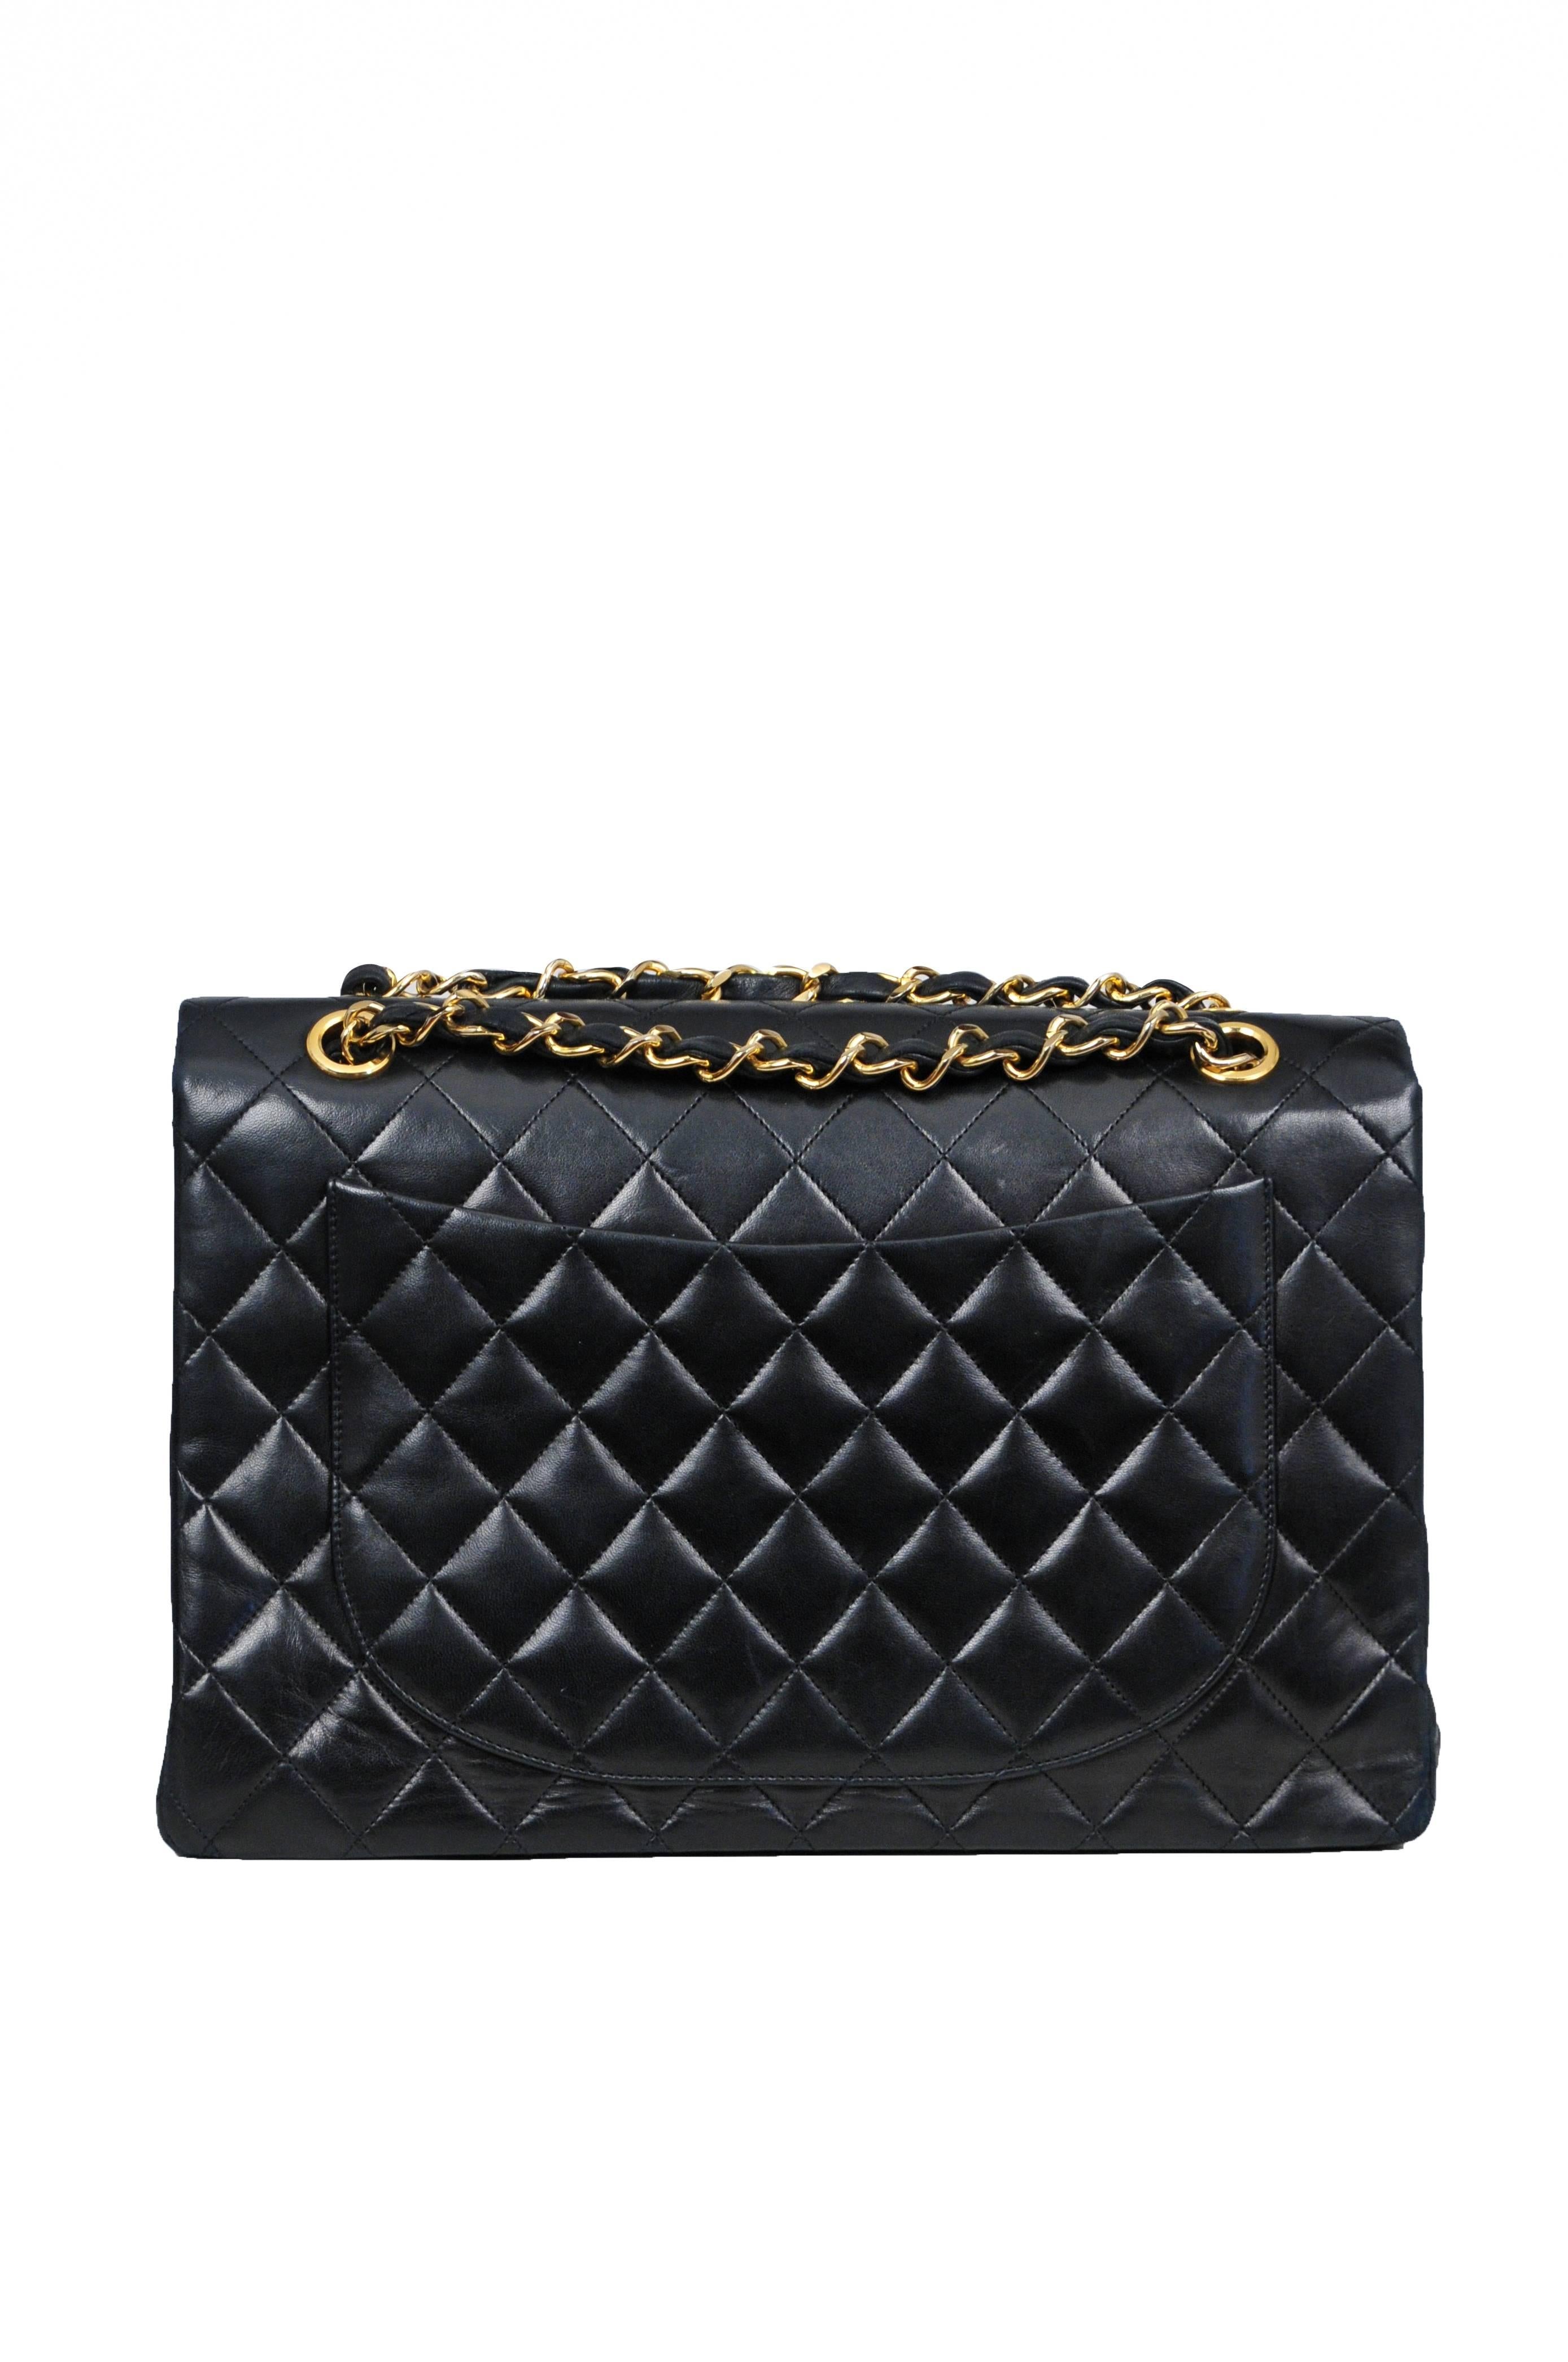 Vintage Chanel Classic XL jumbo single flap bag in black quilted lambskin featuring leather interior lining, iconic leather and gold tone chain woven straps, a classic patch pocket at the back, and a gold tone turn-lock closure at the front. The bag